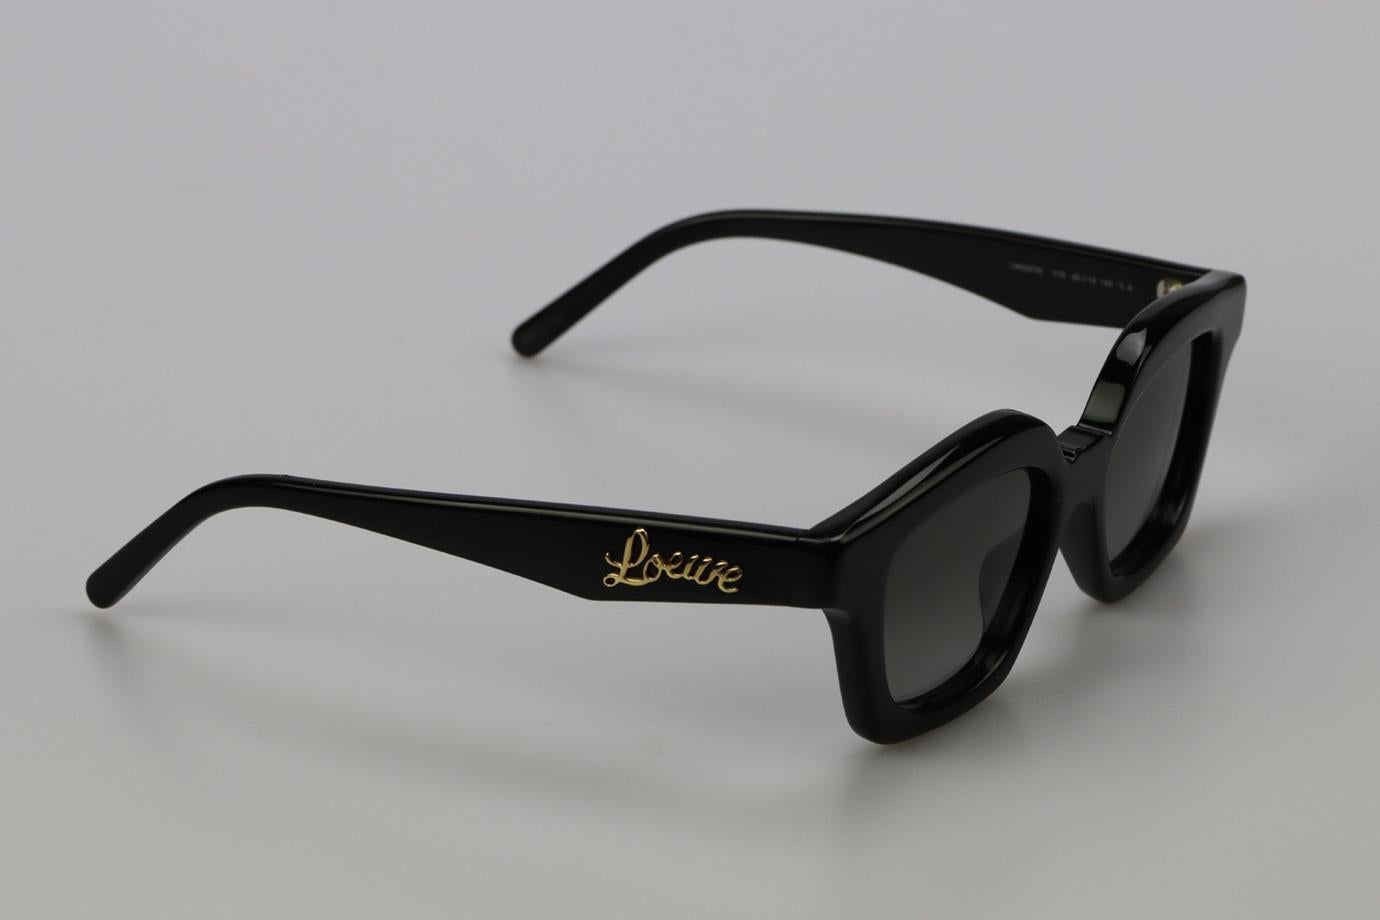 Loewe Square Frame Acetate Sunglasses. Black. Does not come with - case. Style code: LW400781. Lens: 49 mm. Arm: 140 mm. Bridge: 18 mm. Condition: Used. Very good condition - Barely worn. No sign of wear; see pictures
